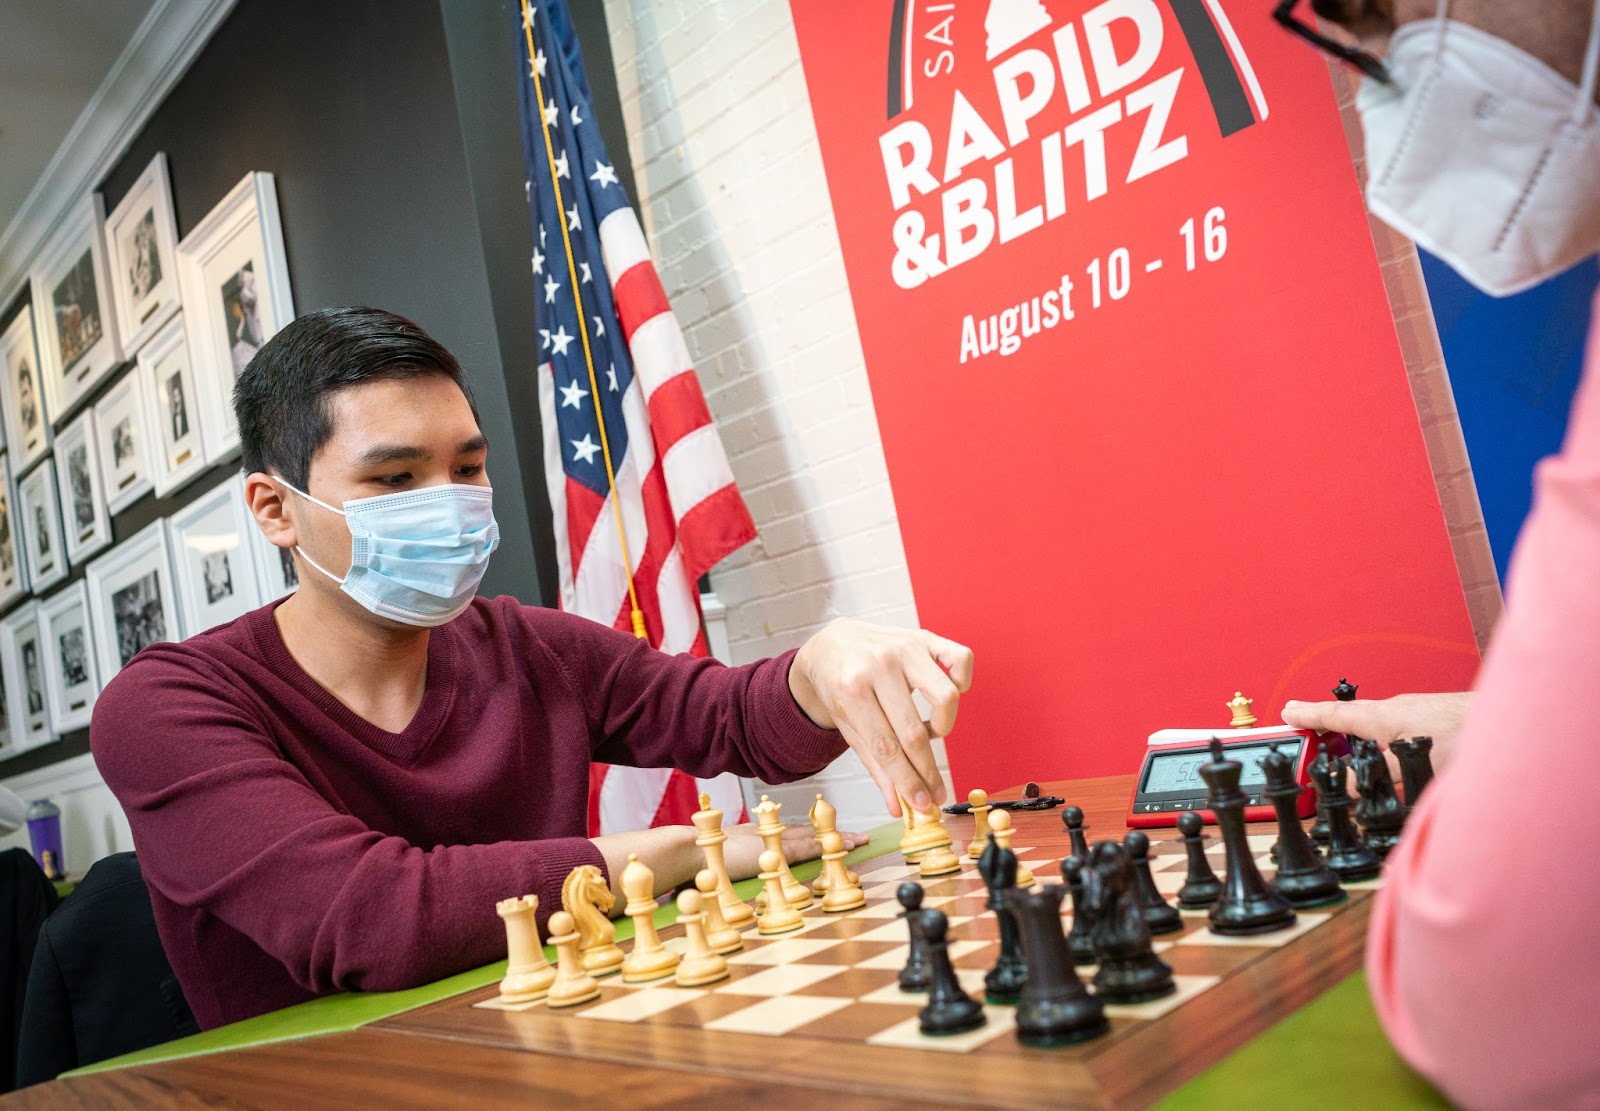 2021 STL Rapid & Blitz: Nakamura in the lead after rapid